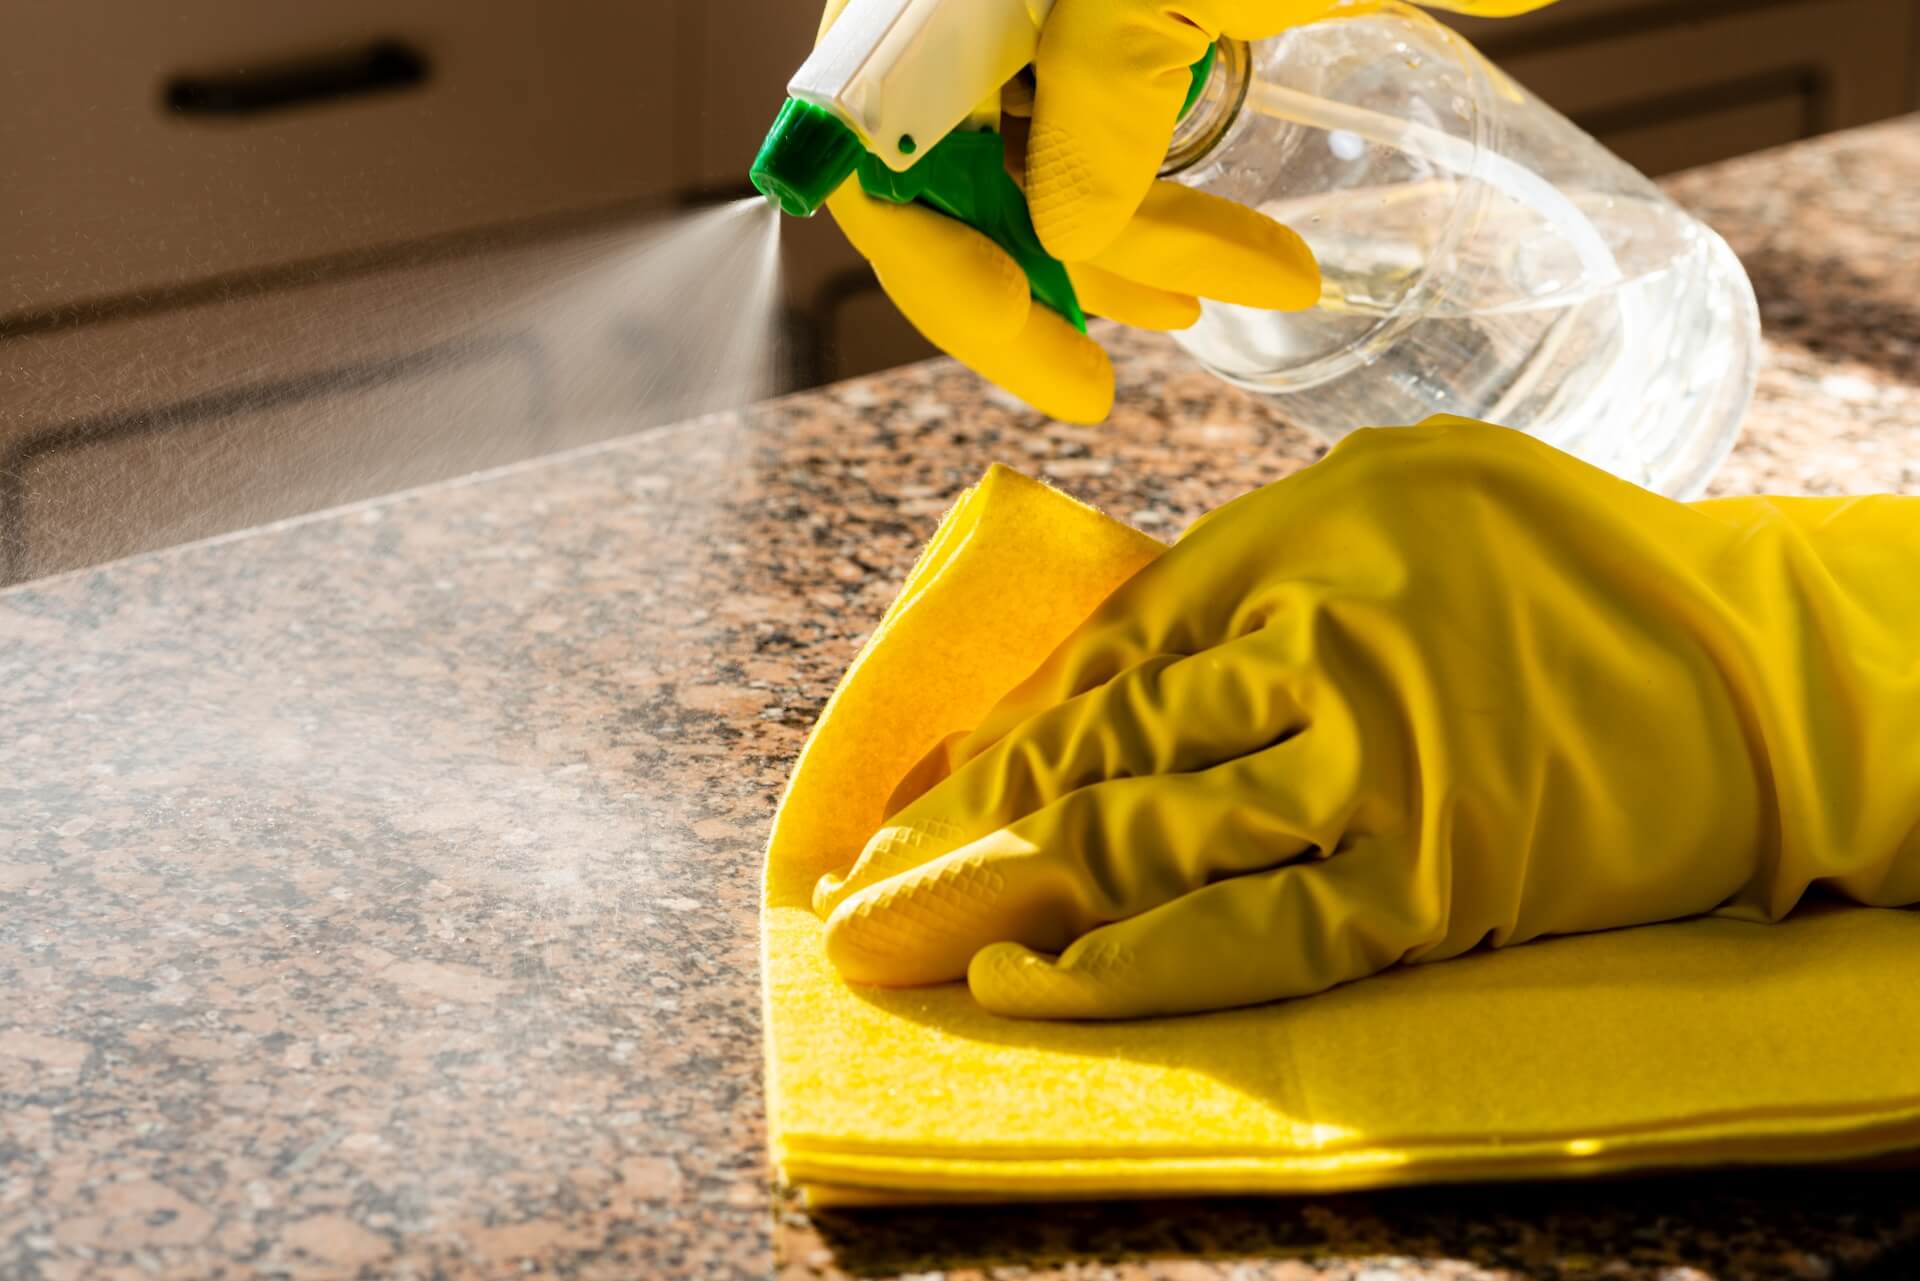 cleaning and caring for granite countertops